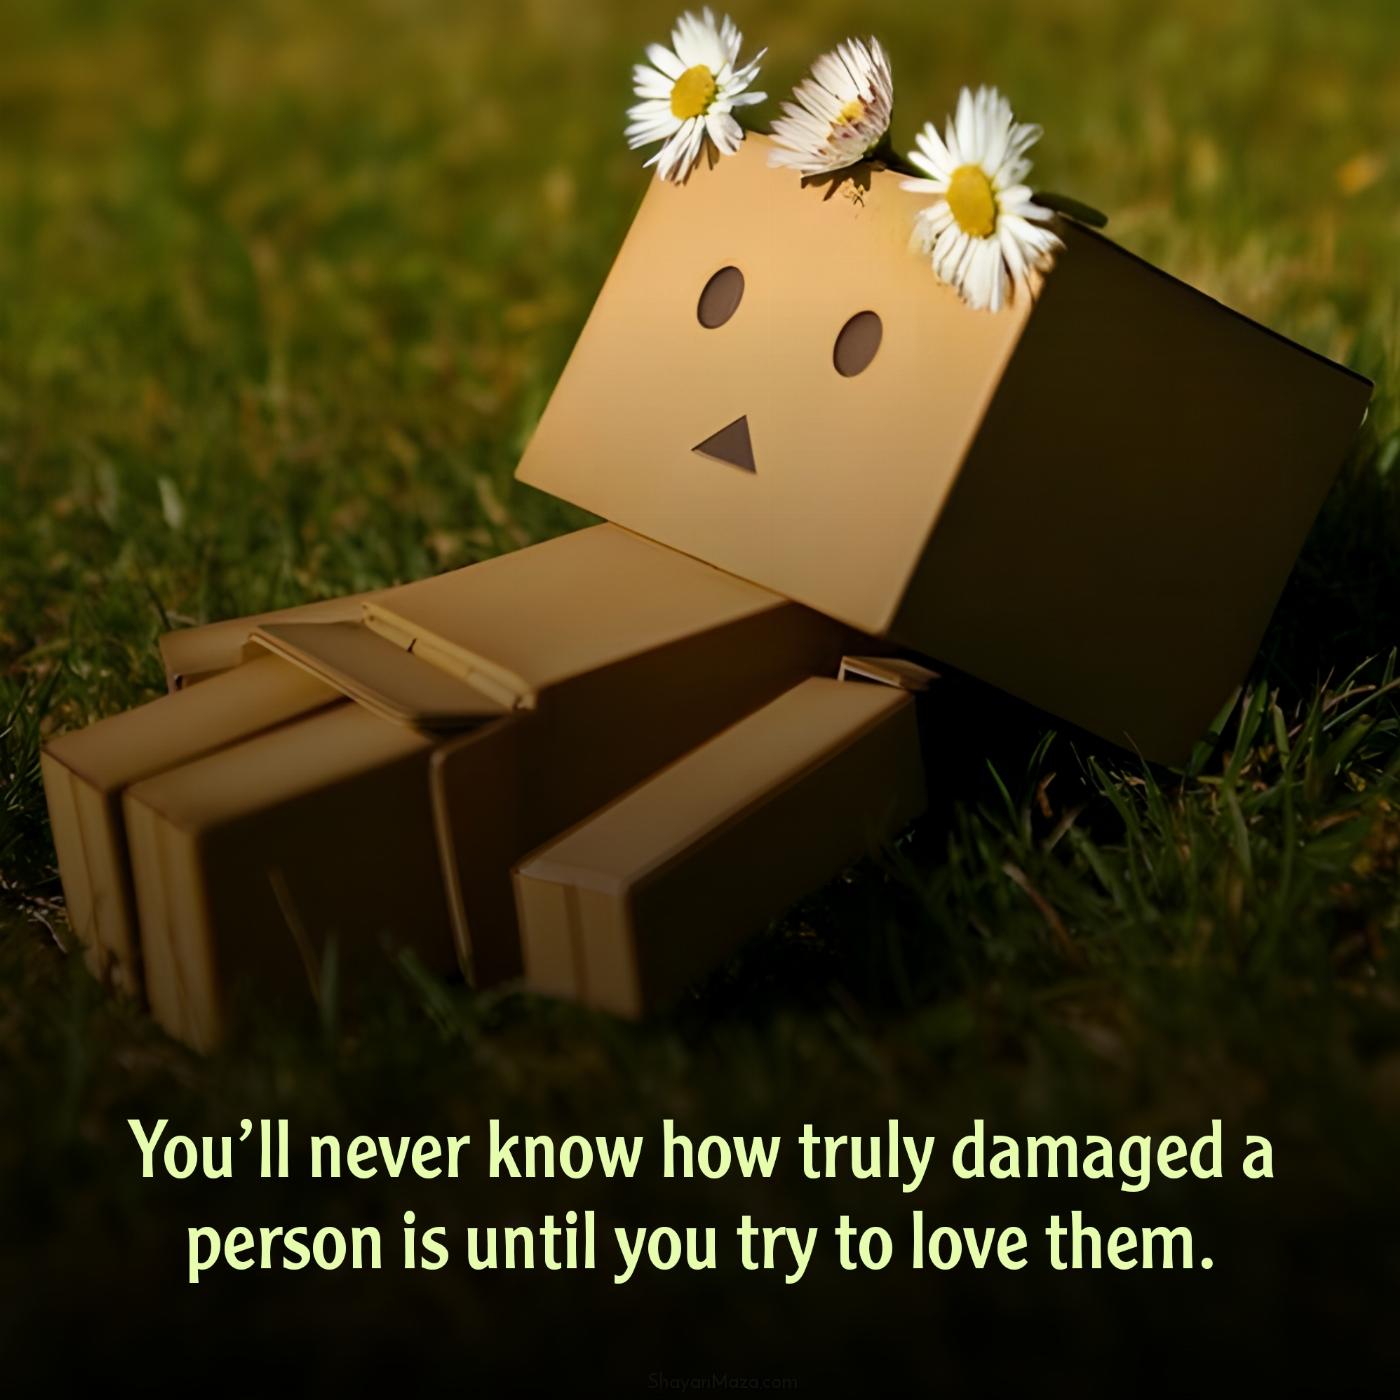 Youll never know how truly damaged a person is until you try